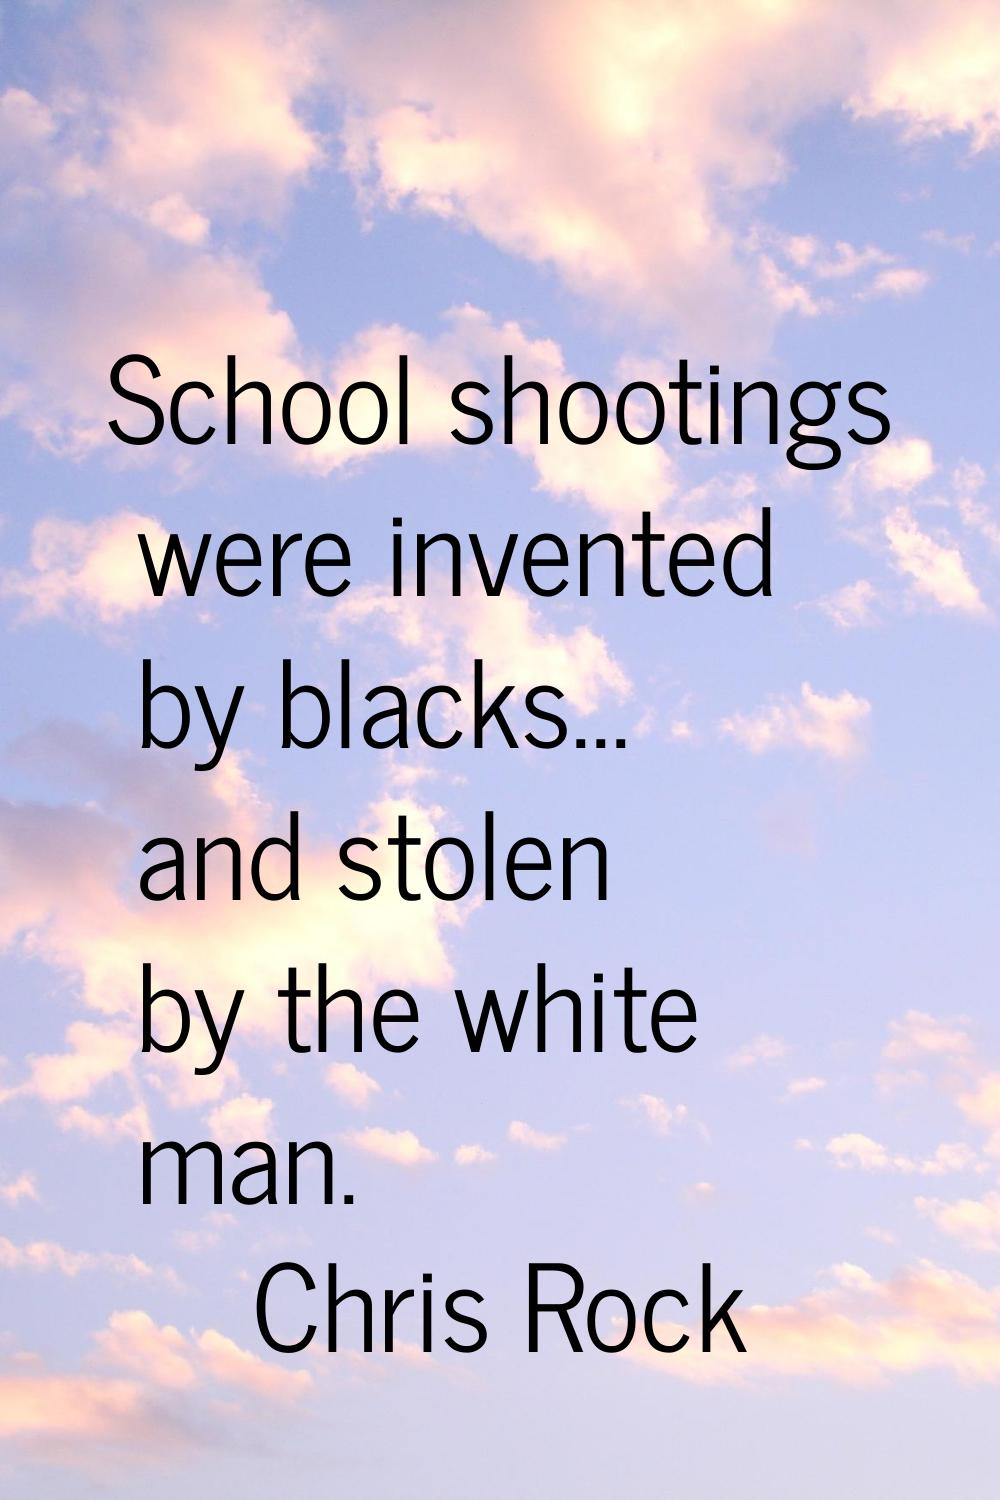 School shootings were invented by blacks... and stolen by the white man.